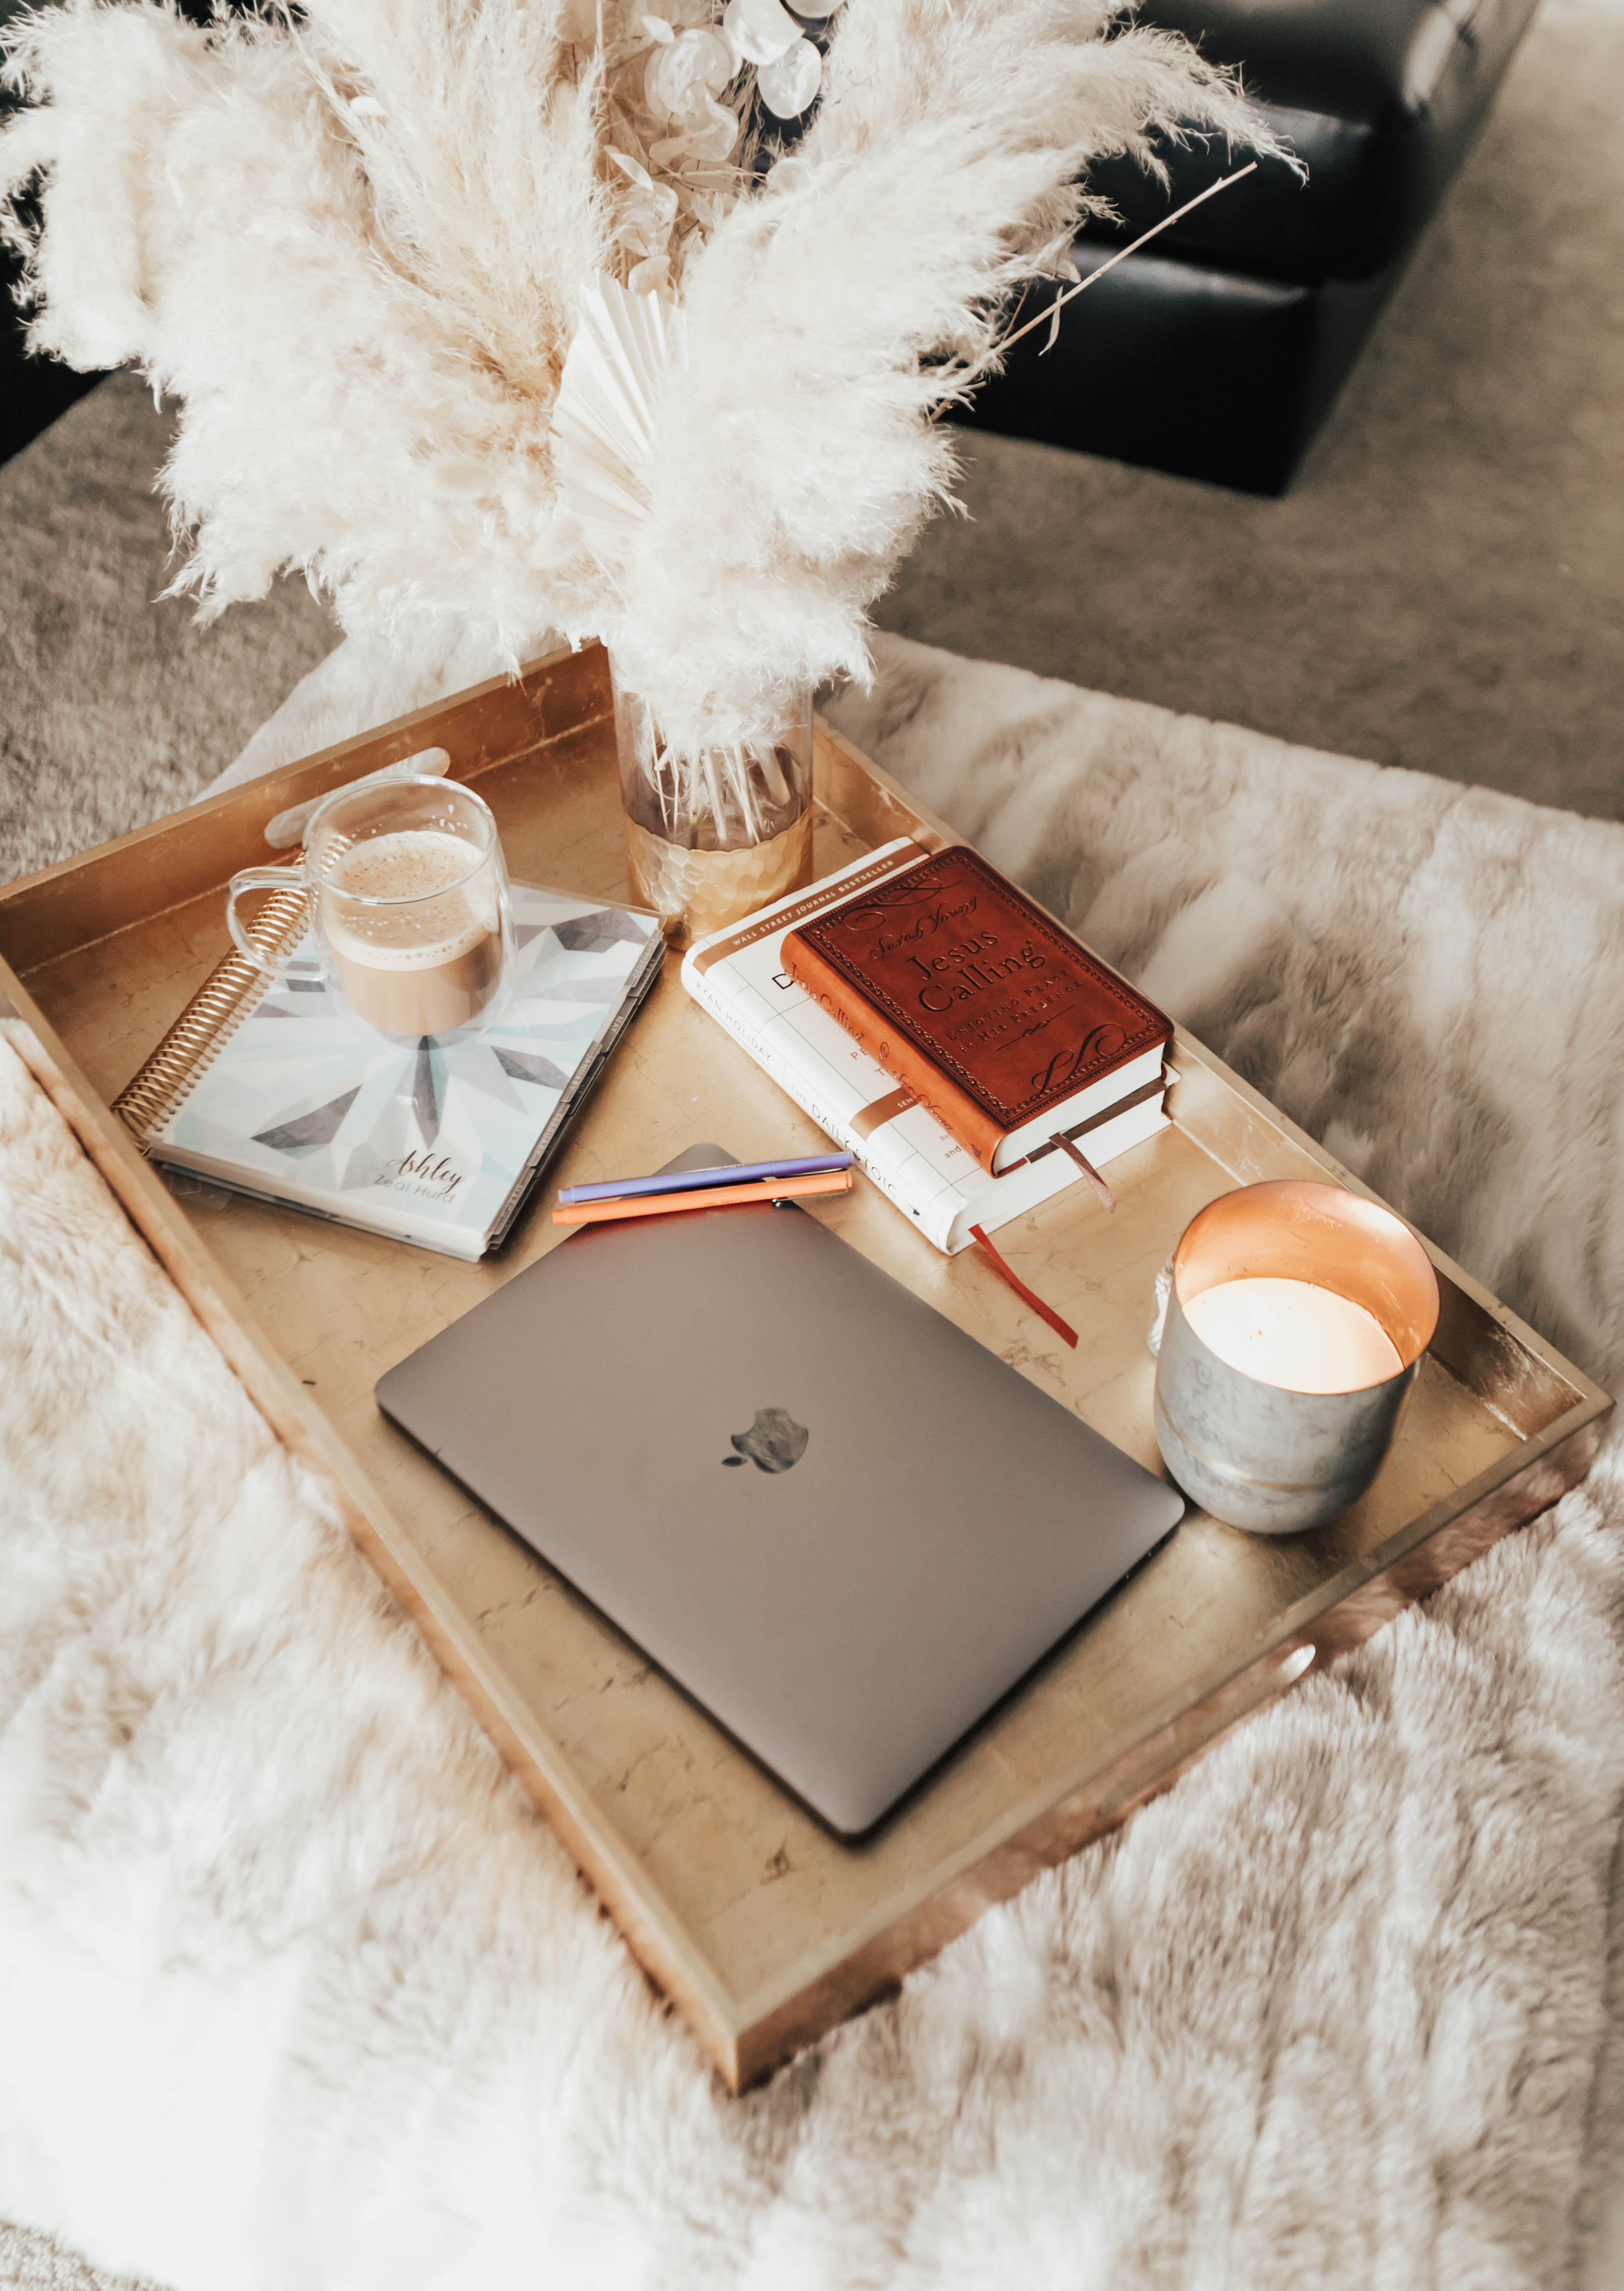 Reno blogger, Ashley Zeal, from Two Peas in a Prada, shares Ashley's morning routine. She gets into specific detail about the exact things she does every single morning to set her up for a successful day.